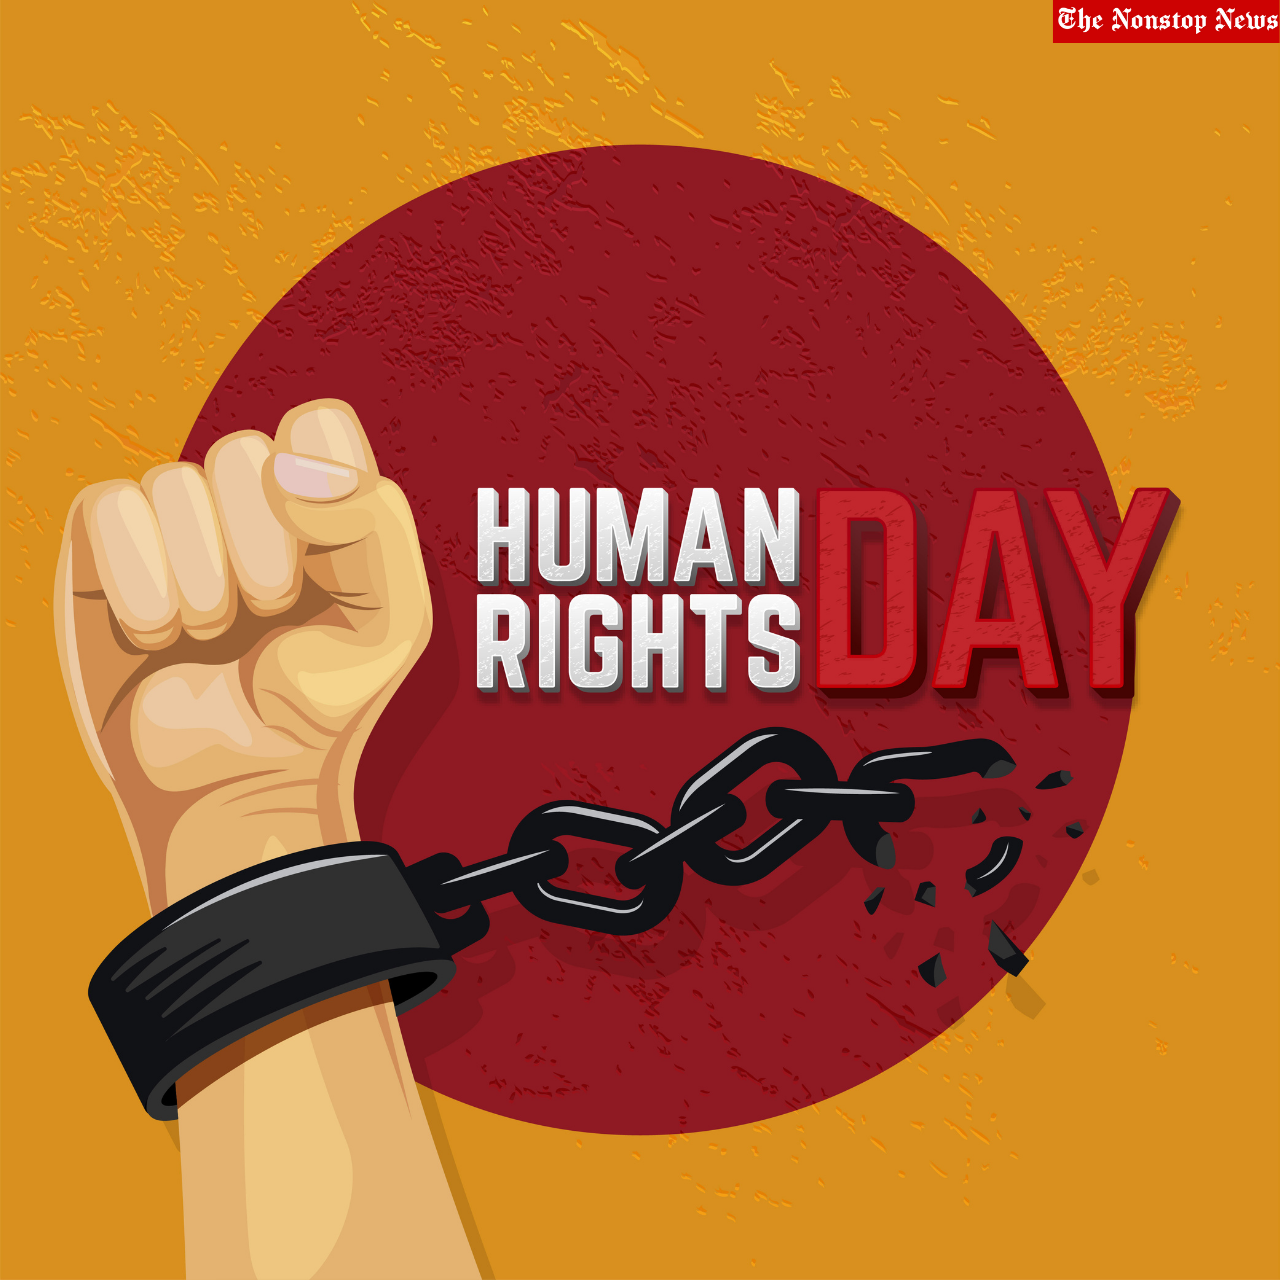 Human Rights Day 2021 Wishes, Quotes, Slogans, Messages, Images, Greetings to Share